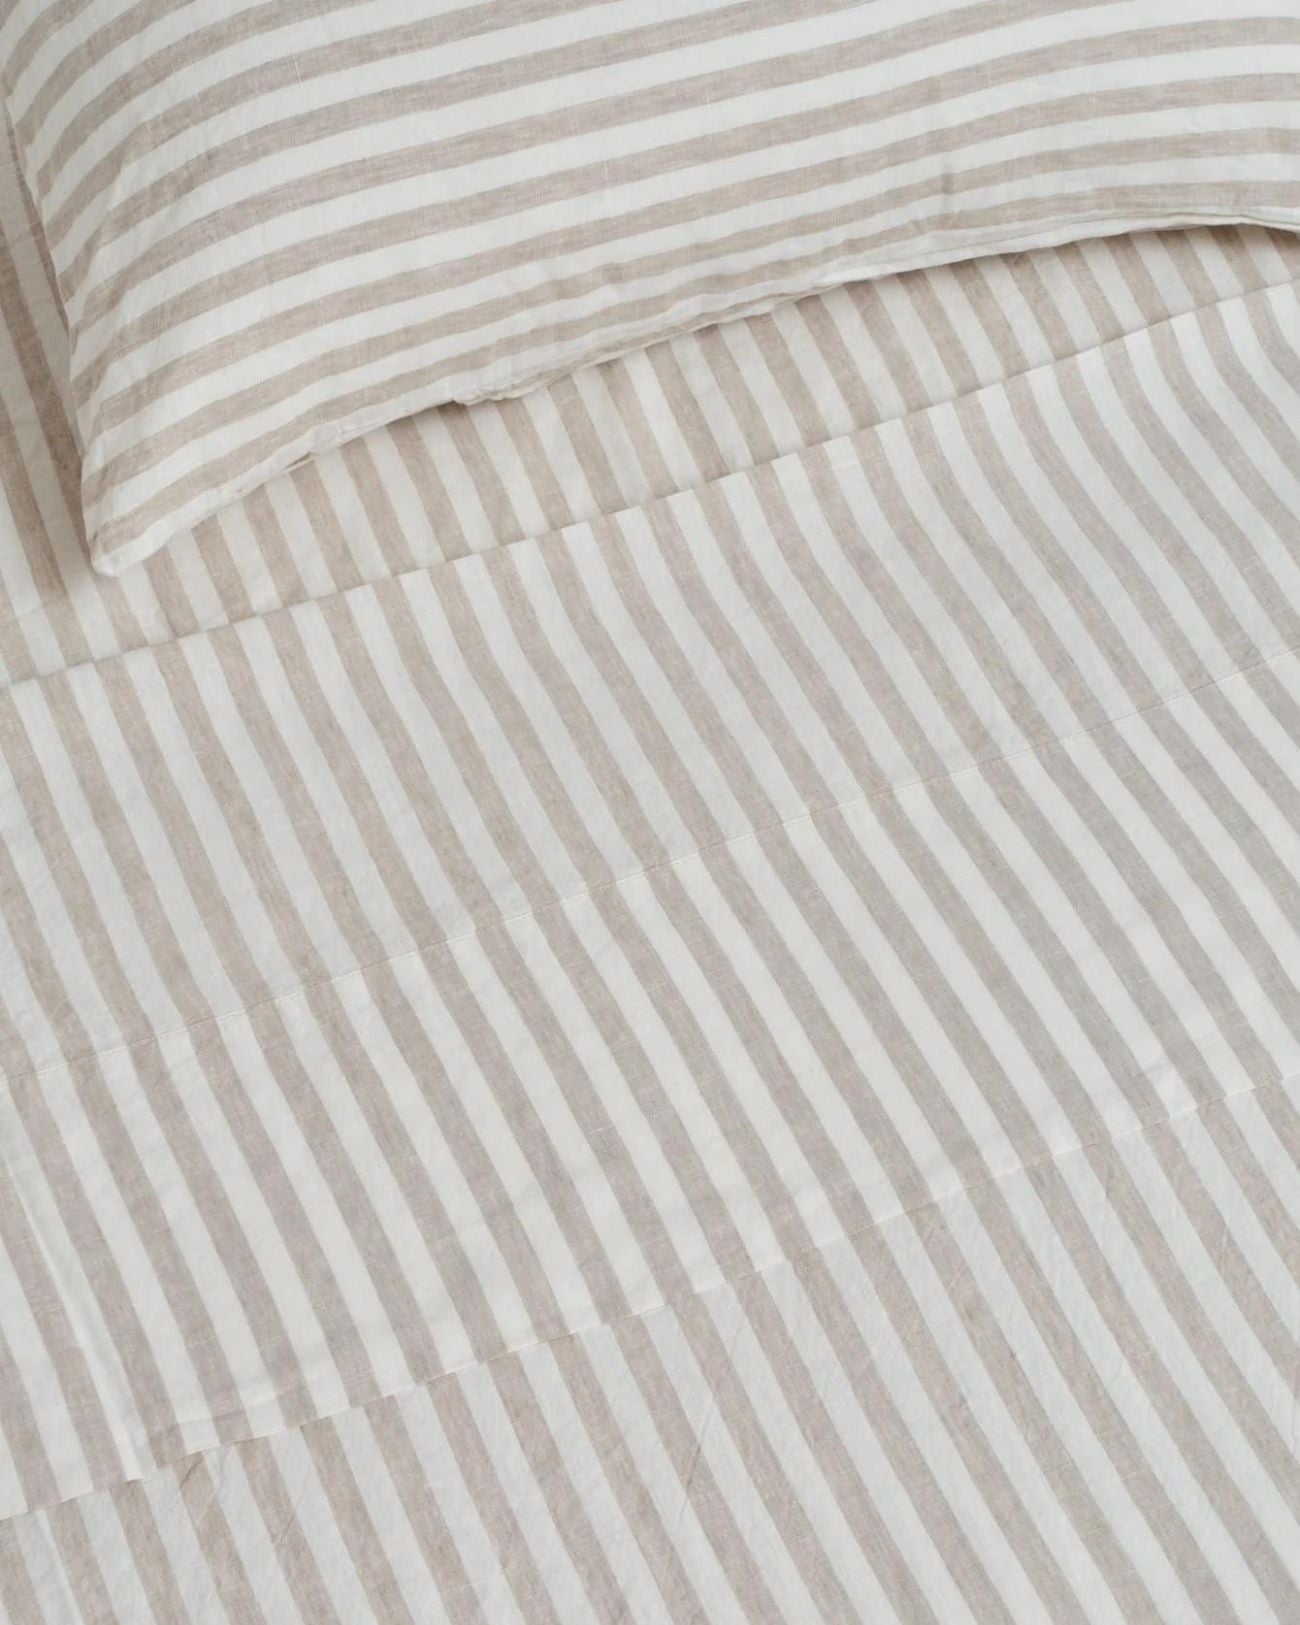 Make your childs bed your comfiest place with our 100% French linen pillowcase set in Wide Natural Stripes. Made from 100% European French. Stonewashed with extra soft finish